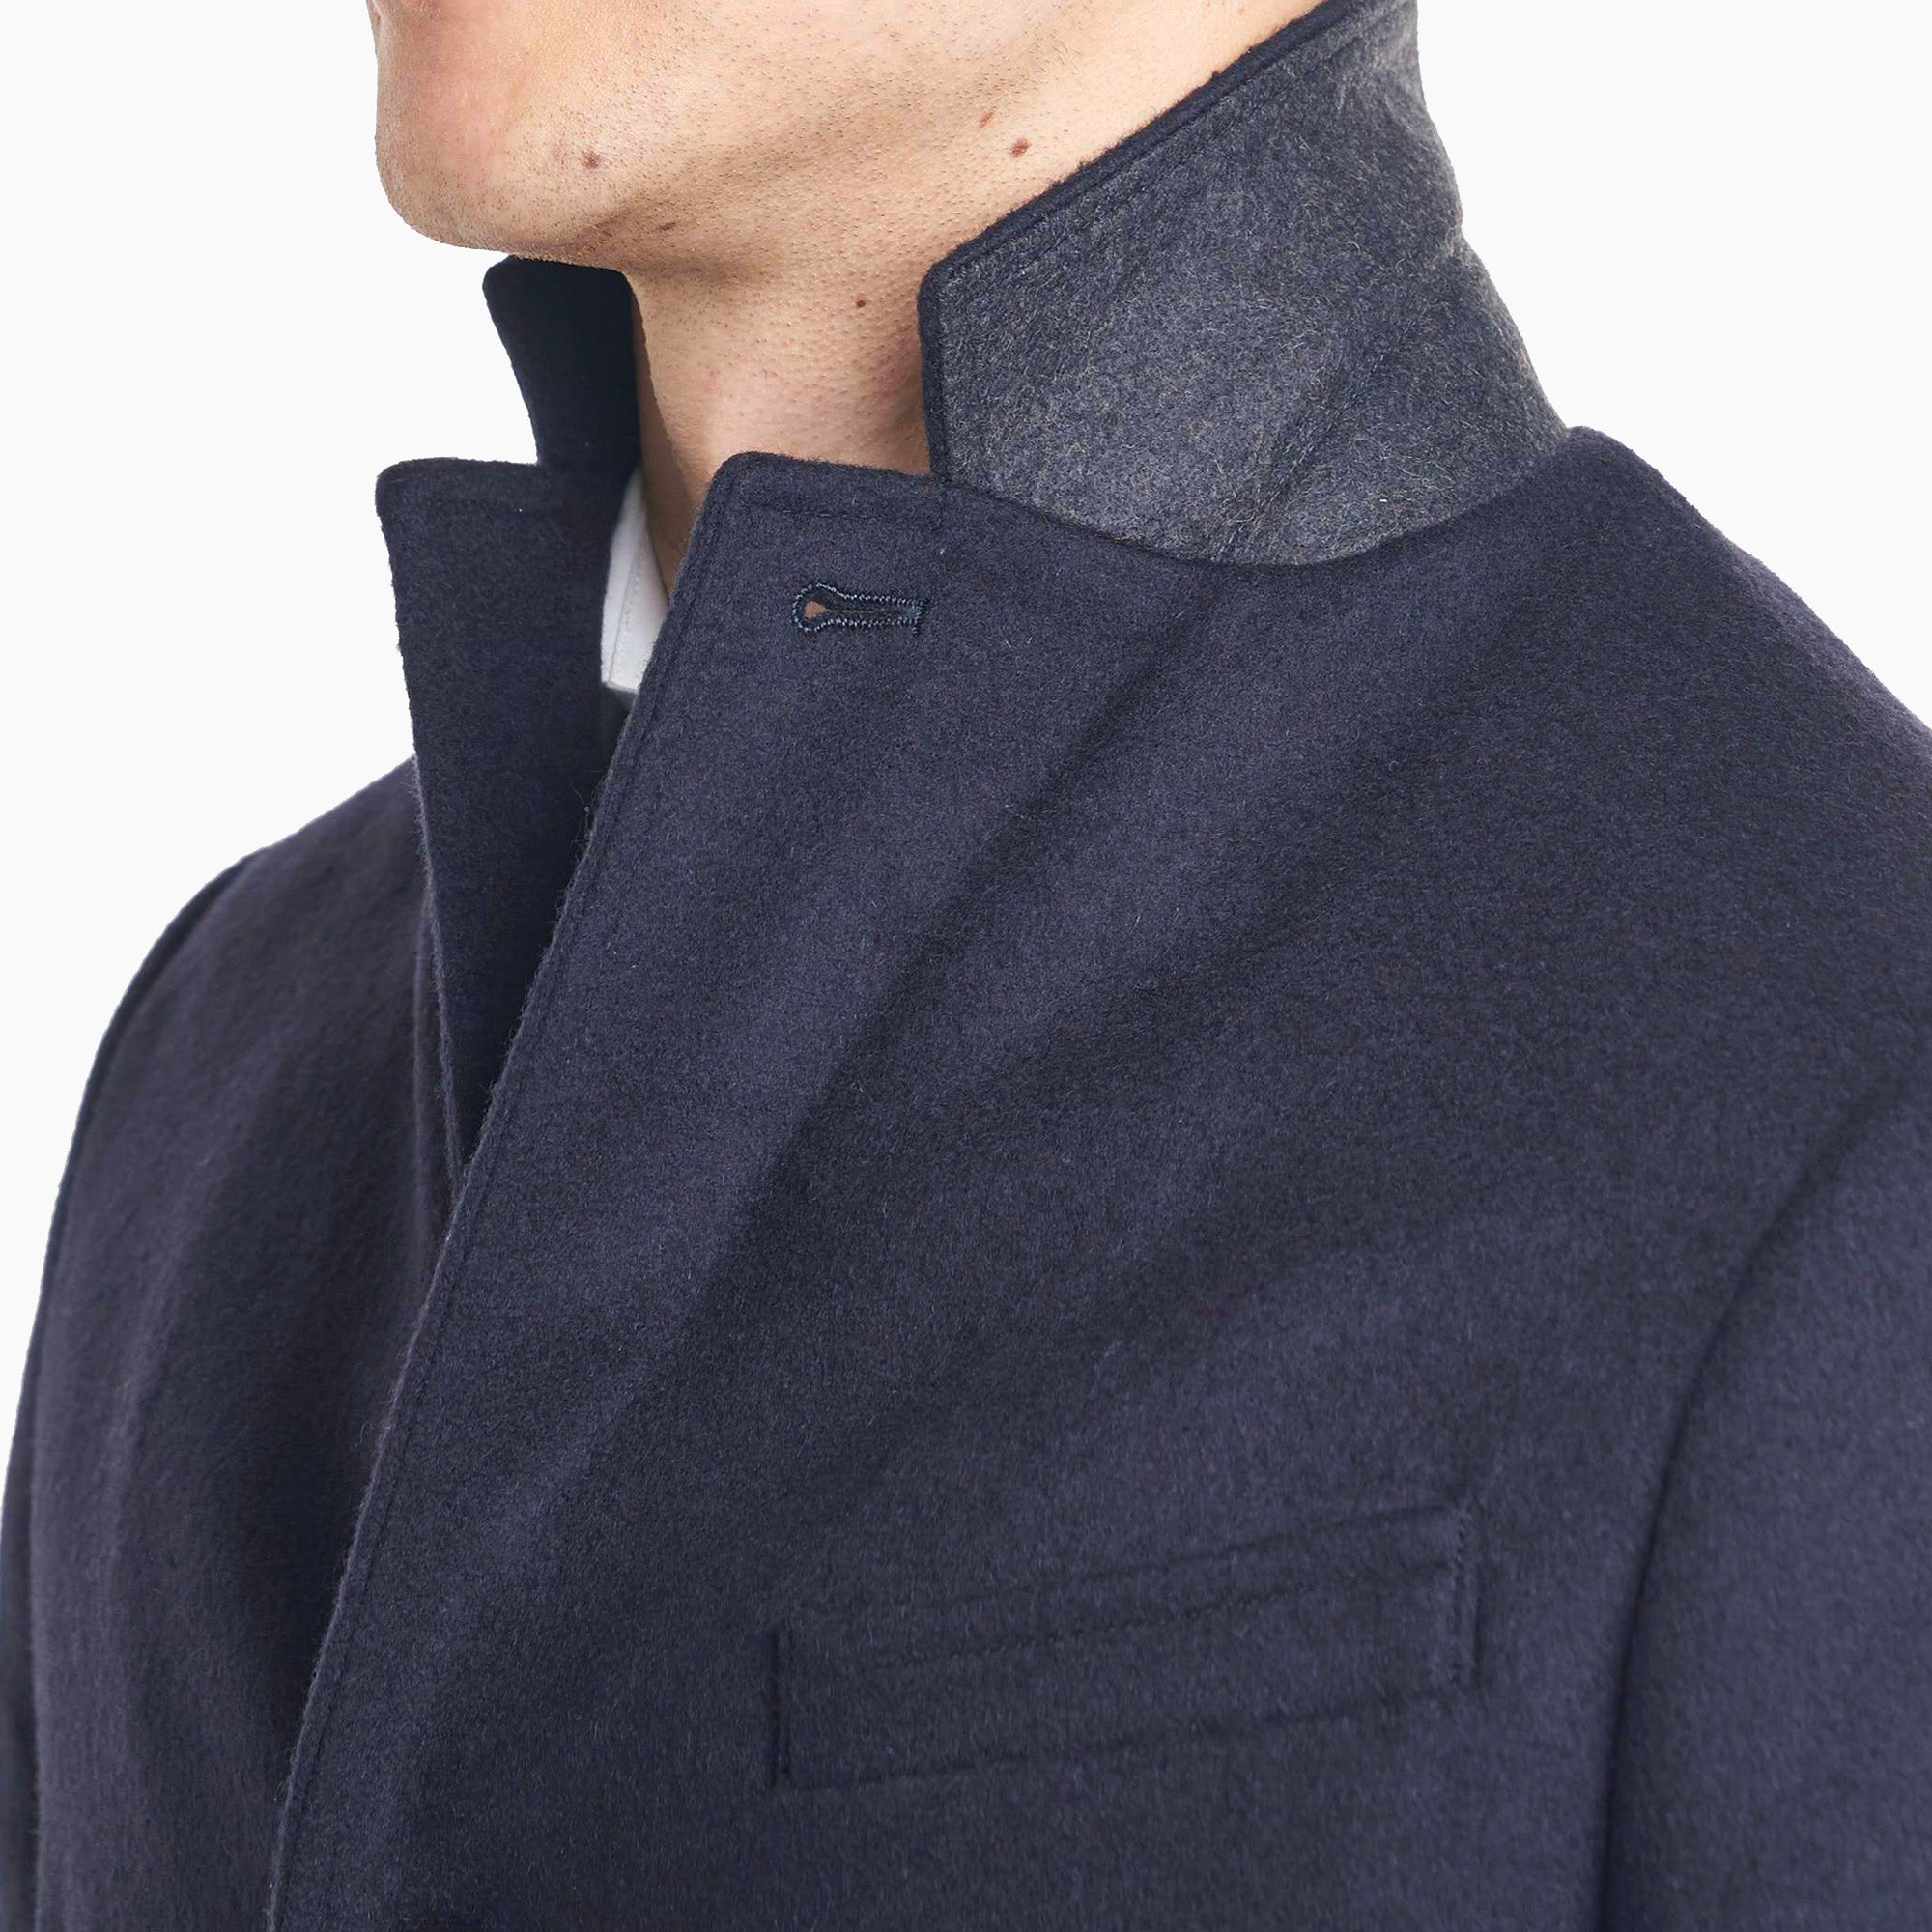 Fulton Wool Cashmere Topcoat - Navy